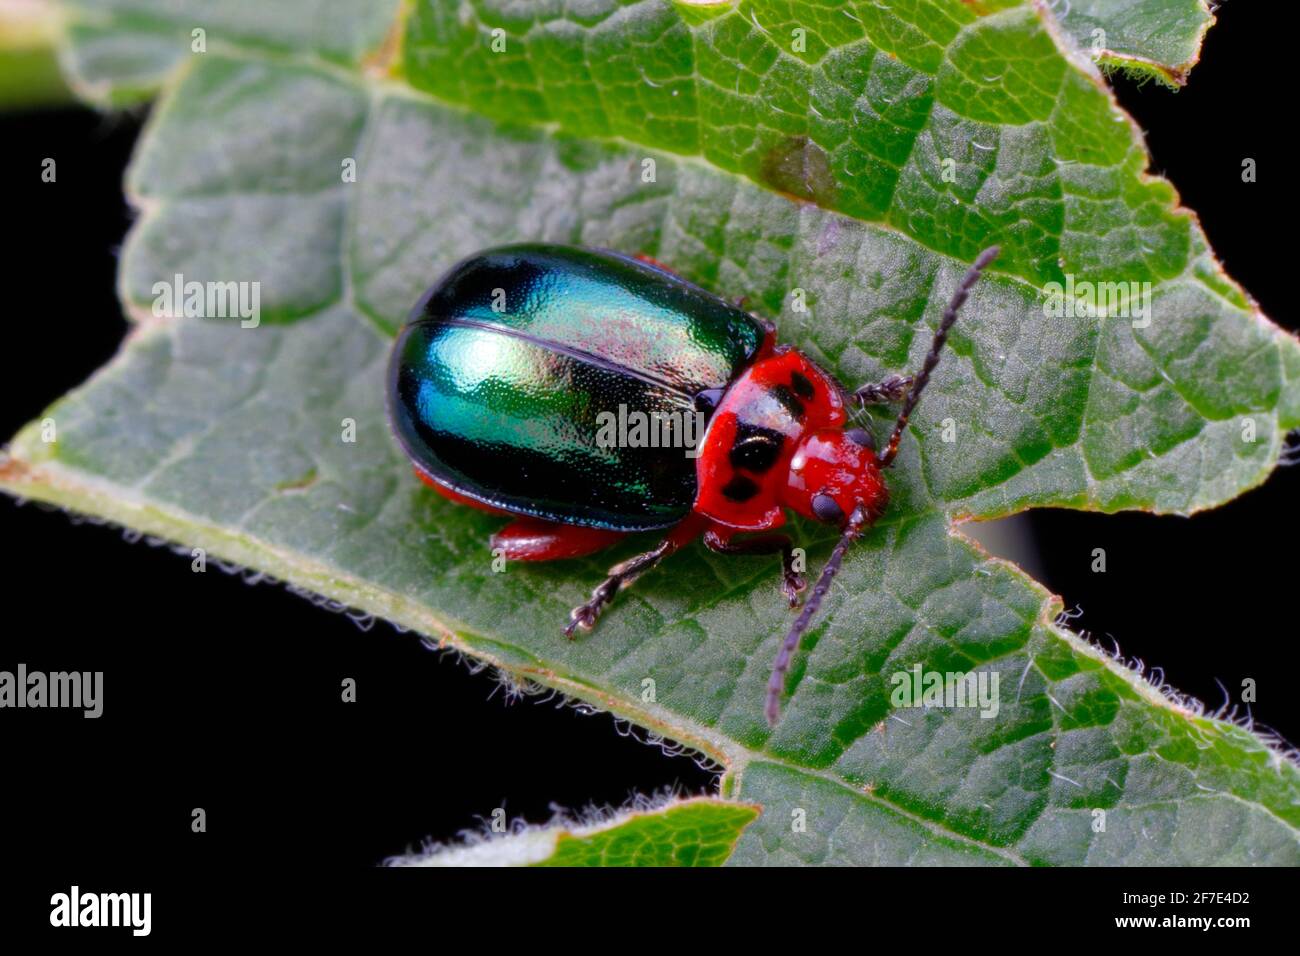 An iridescent beetle of the elm beetle family is crawling on a leaf. Stock Photo